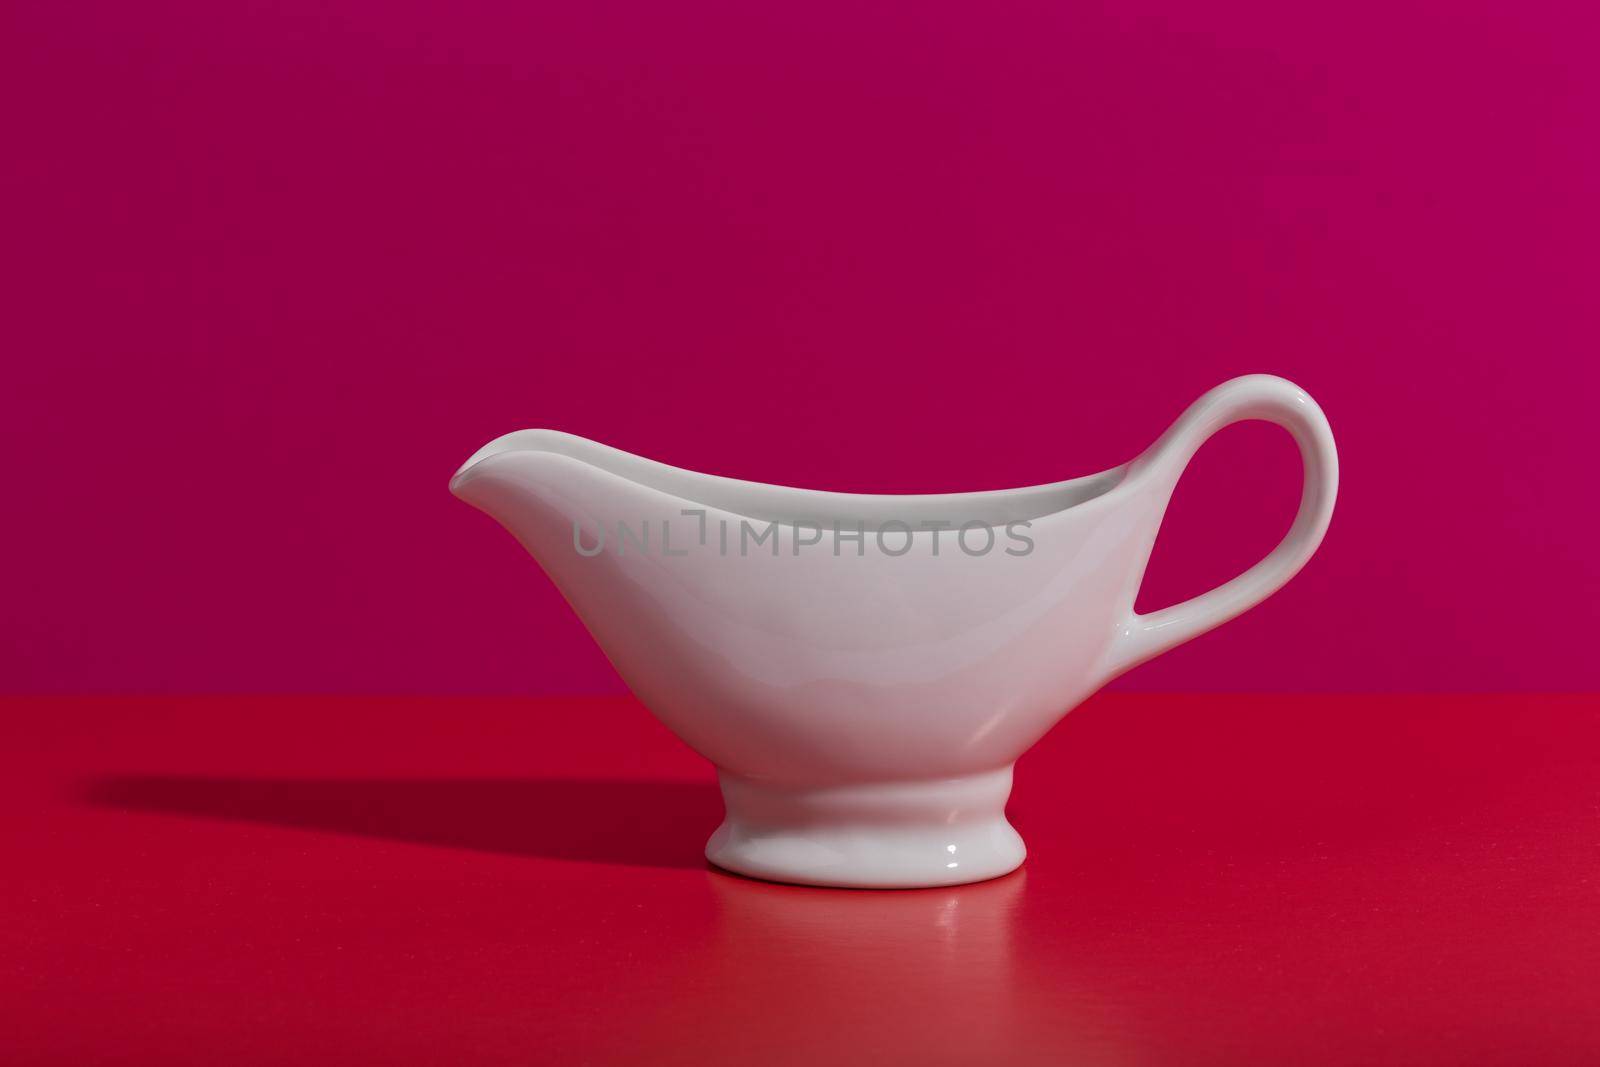 White ceramic sauce boat on creative red and pink background with space for text by Senorina_Irina